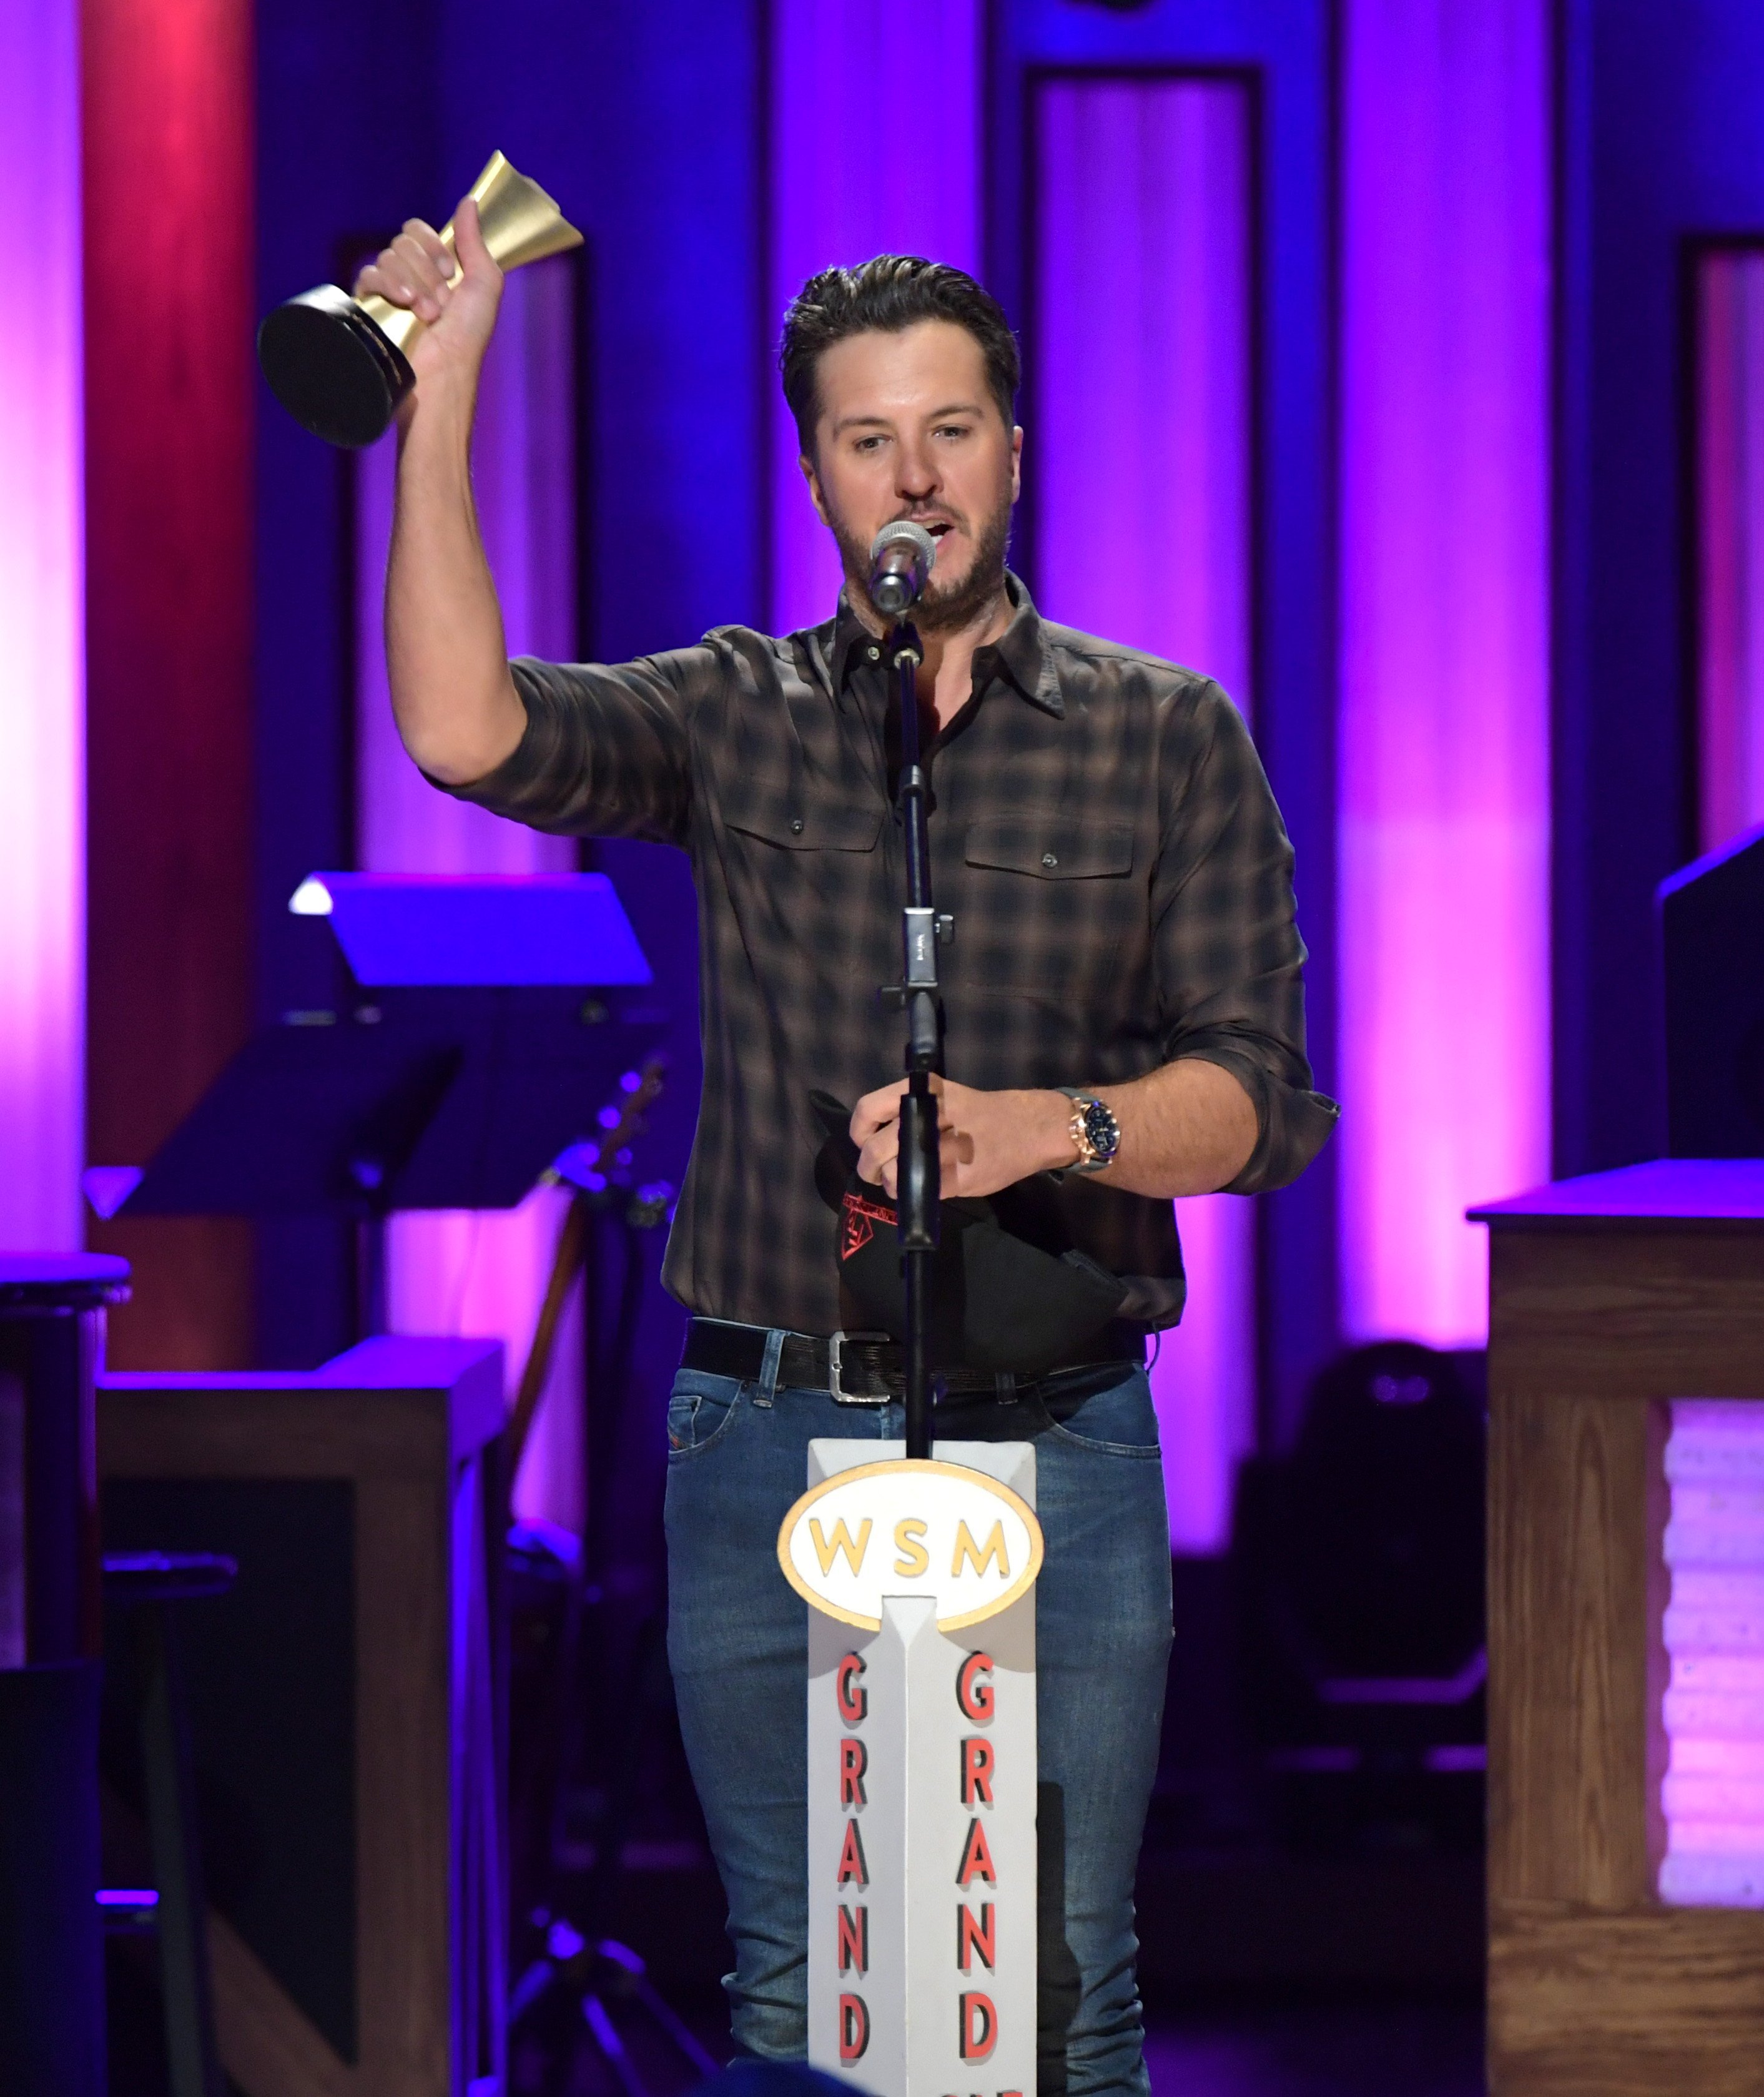 Luke Bryan receives the Artist of the Decade Award from ACM in Nashville, Tennessee on October 22, 2019 | Photo: Getty Images